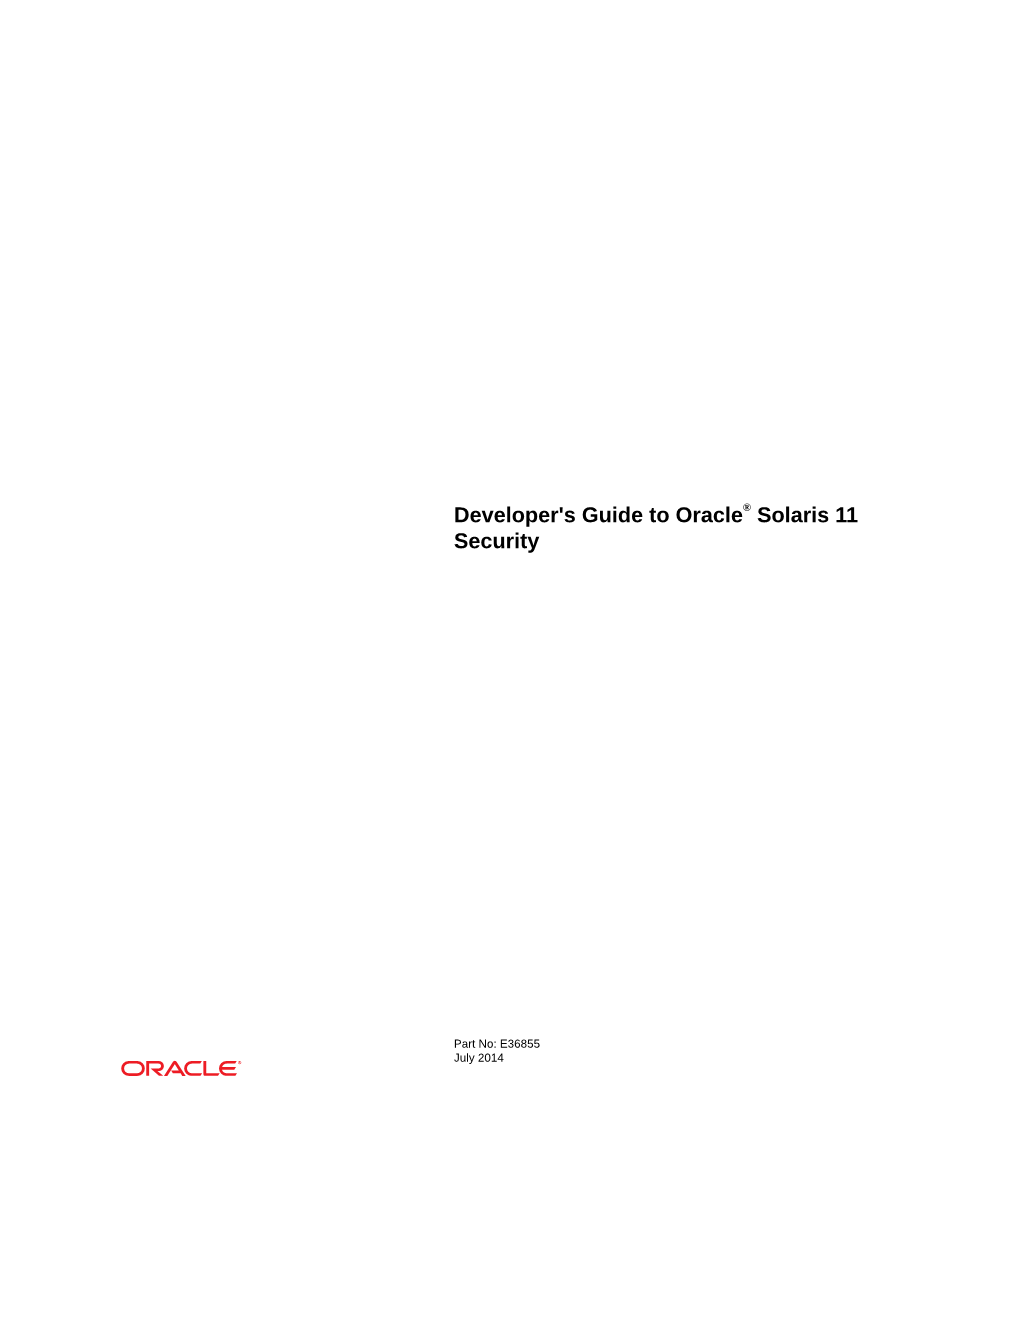 Developer's Guide to Oracle® Solaris 11 Security